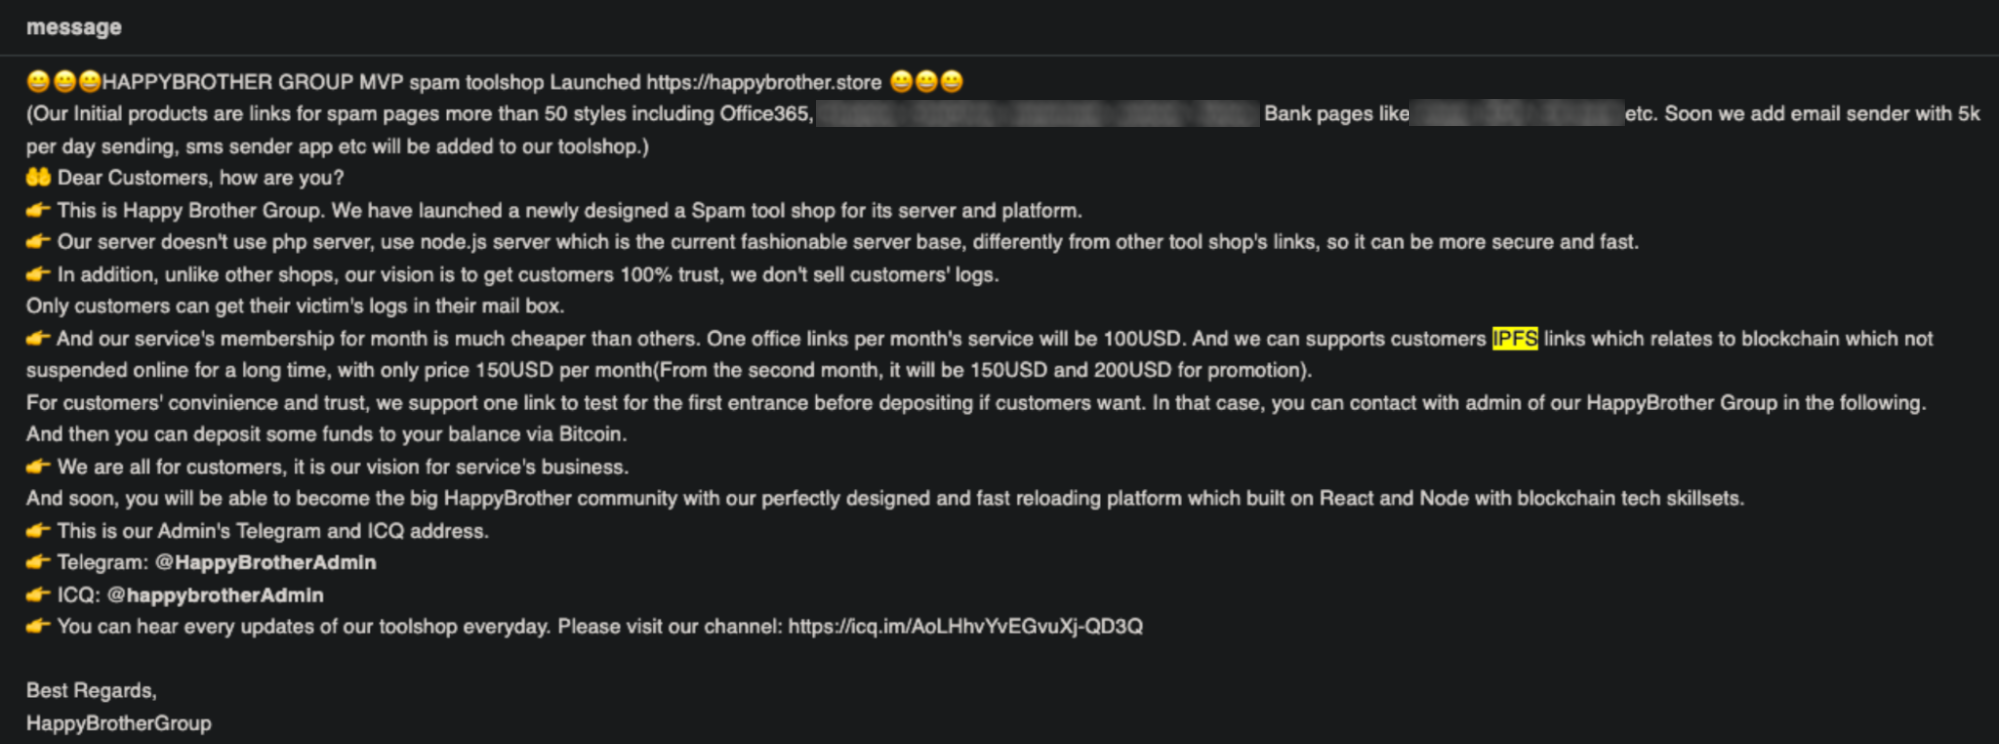 Image 3 is a screenshot of threat actors advertising scam services using IPFS links. The threat actor is part of the HappyBrotherGroup. The message consists of a list of the different ways in the message consists of not only their services, but their skill sets.